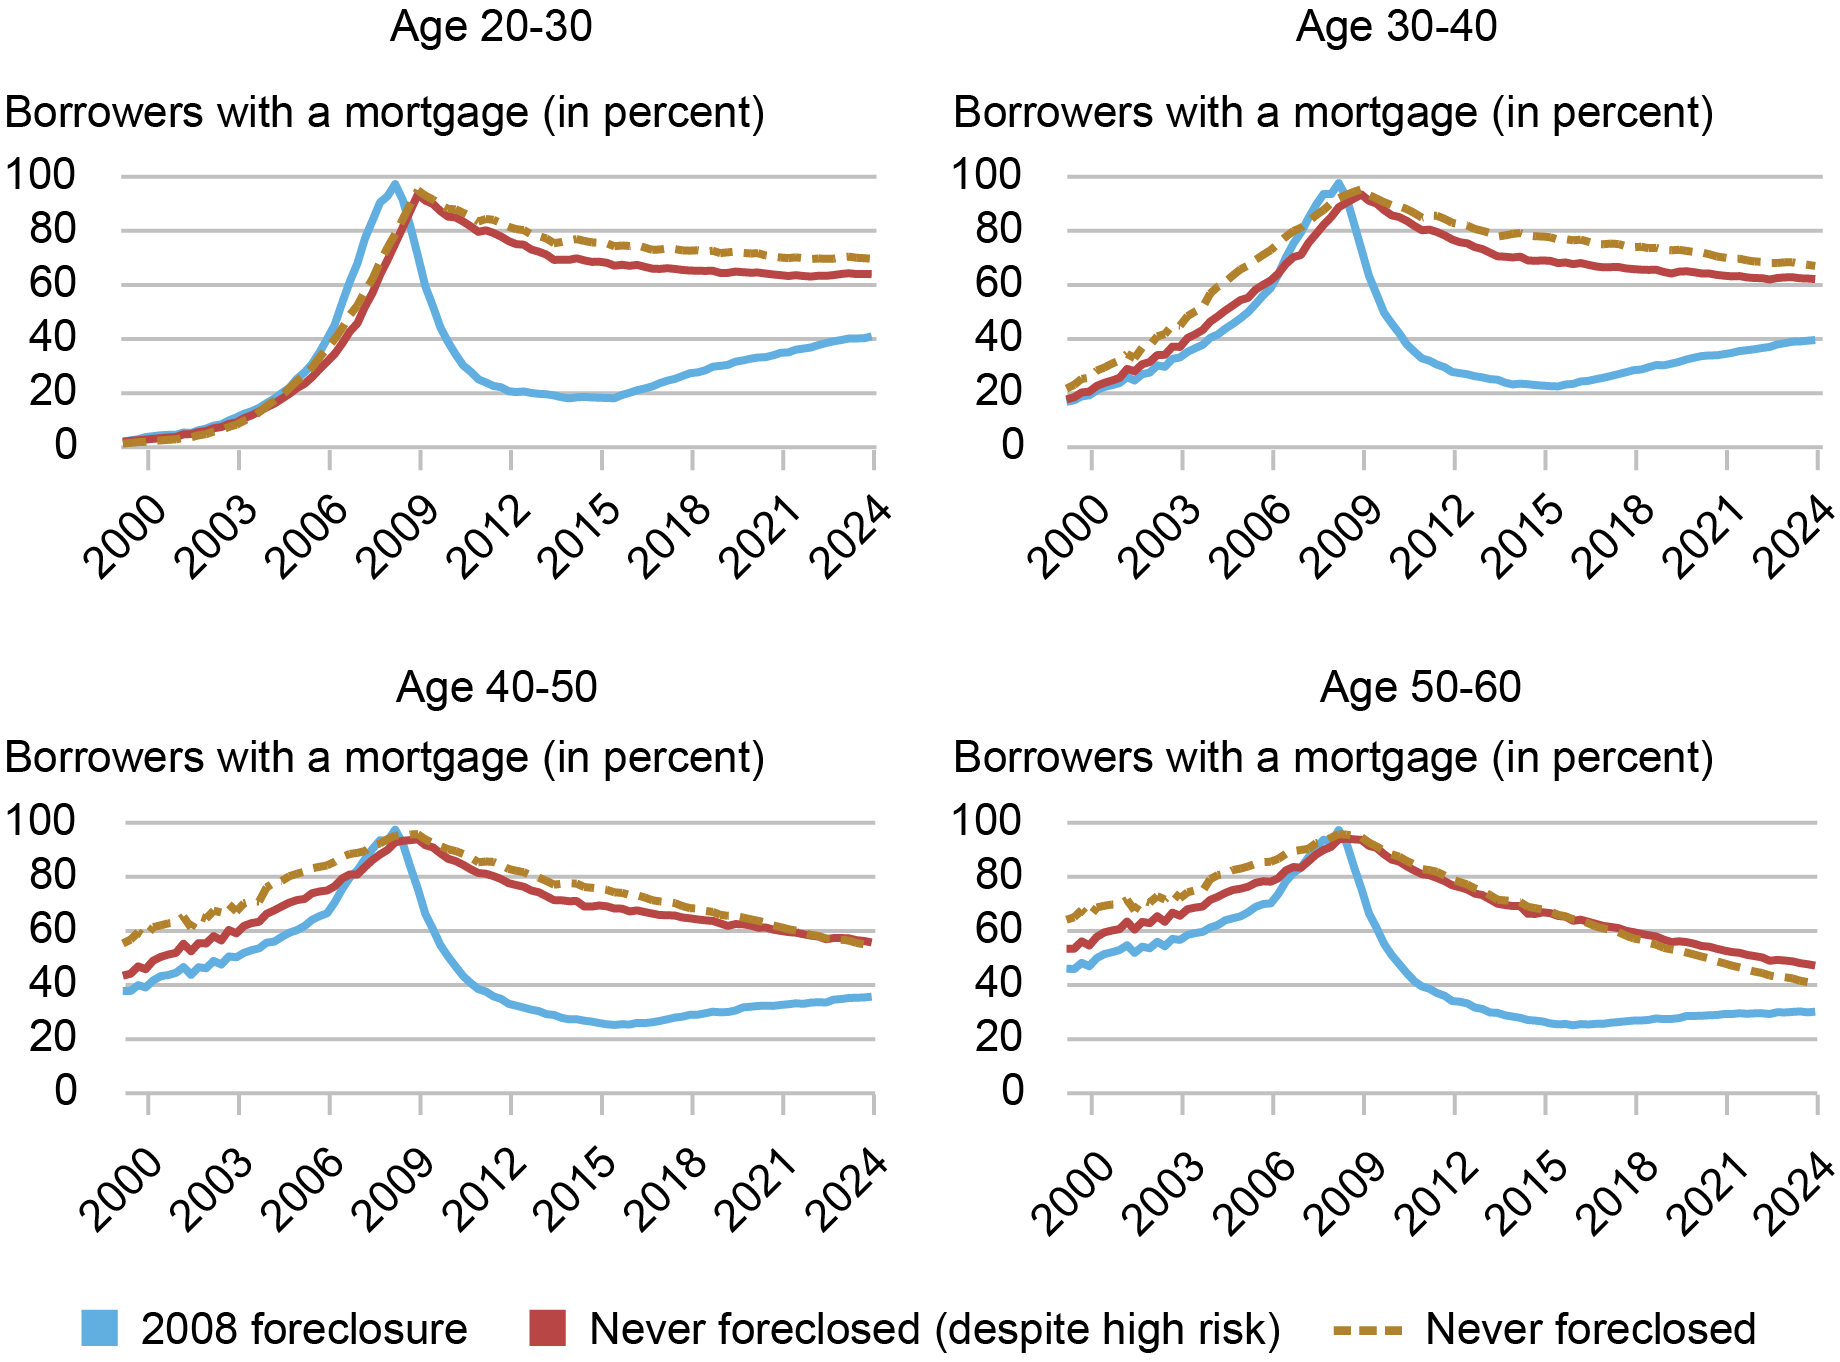 Alt=”Four line charts showing borrowers with a mortgage by percentage for individuals with a 2008 foreclosure (blue), those who never foreclosed despite high risk (red), and those who never foreclosed (gold dotted) for four age groups: age 20-30 (top left), age 30-40 (top right), age 40-50 (bottom left), age 50-60 (bottom right), from 2000 through 2024” 